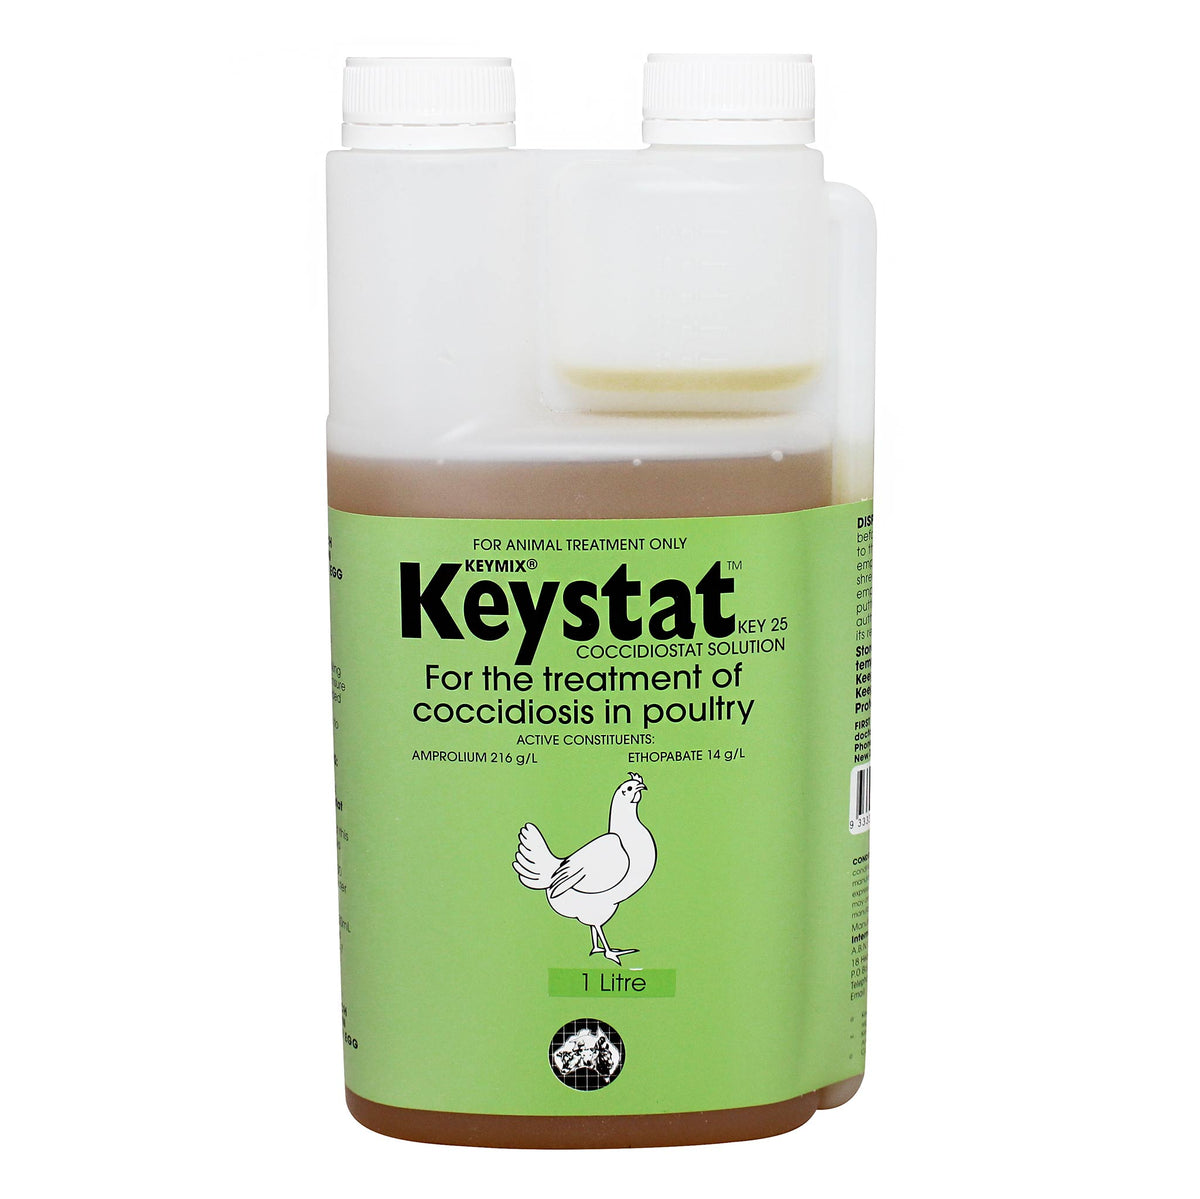 Keystat Coccidiosis Treatment for Poultry